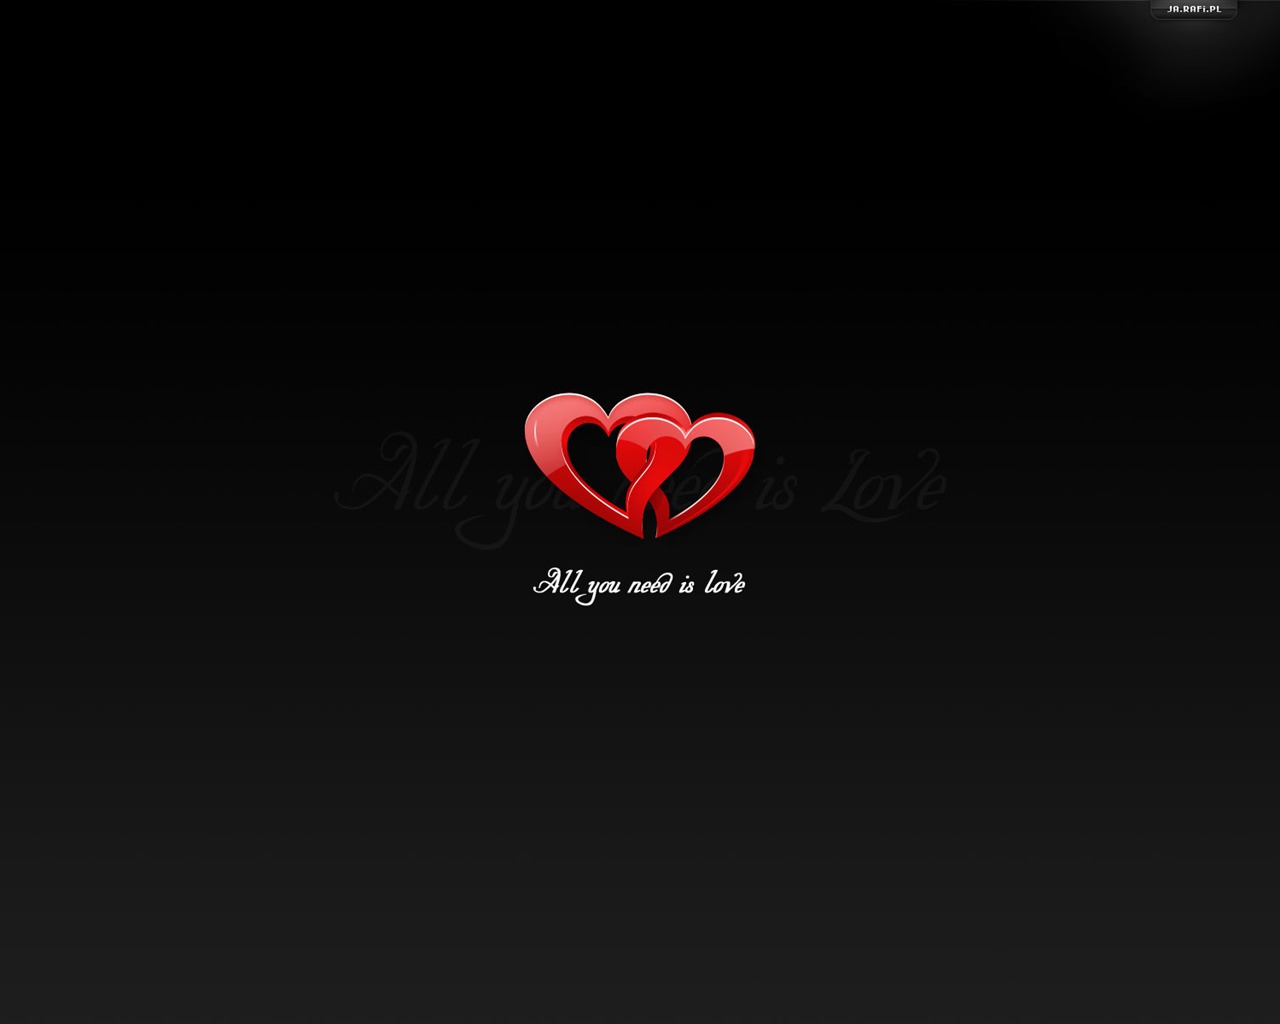 Valentine's Day Theme Wallpapers (3) #12 - 1280x1024